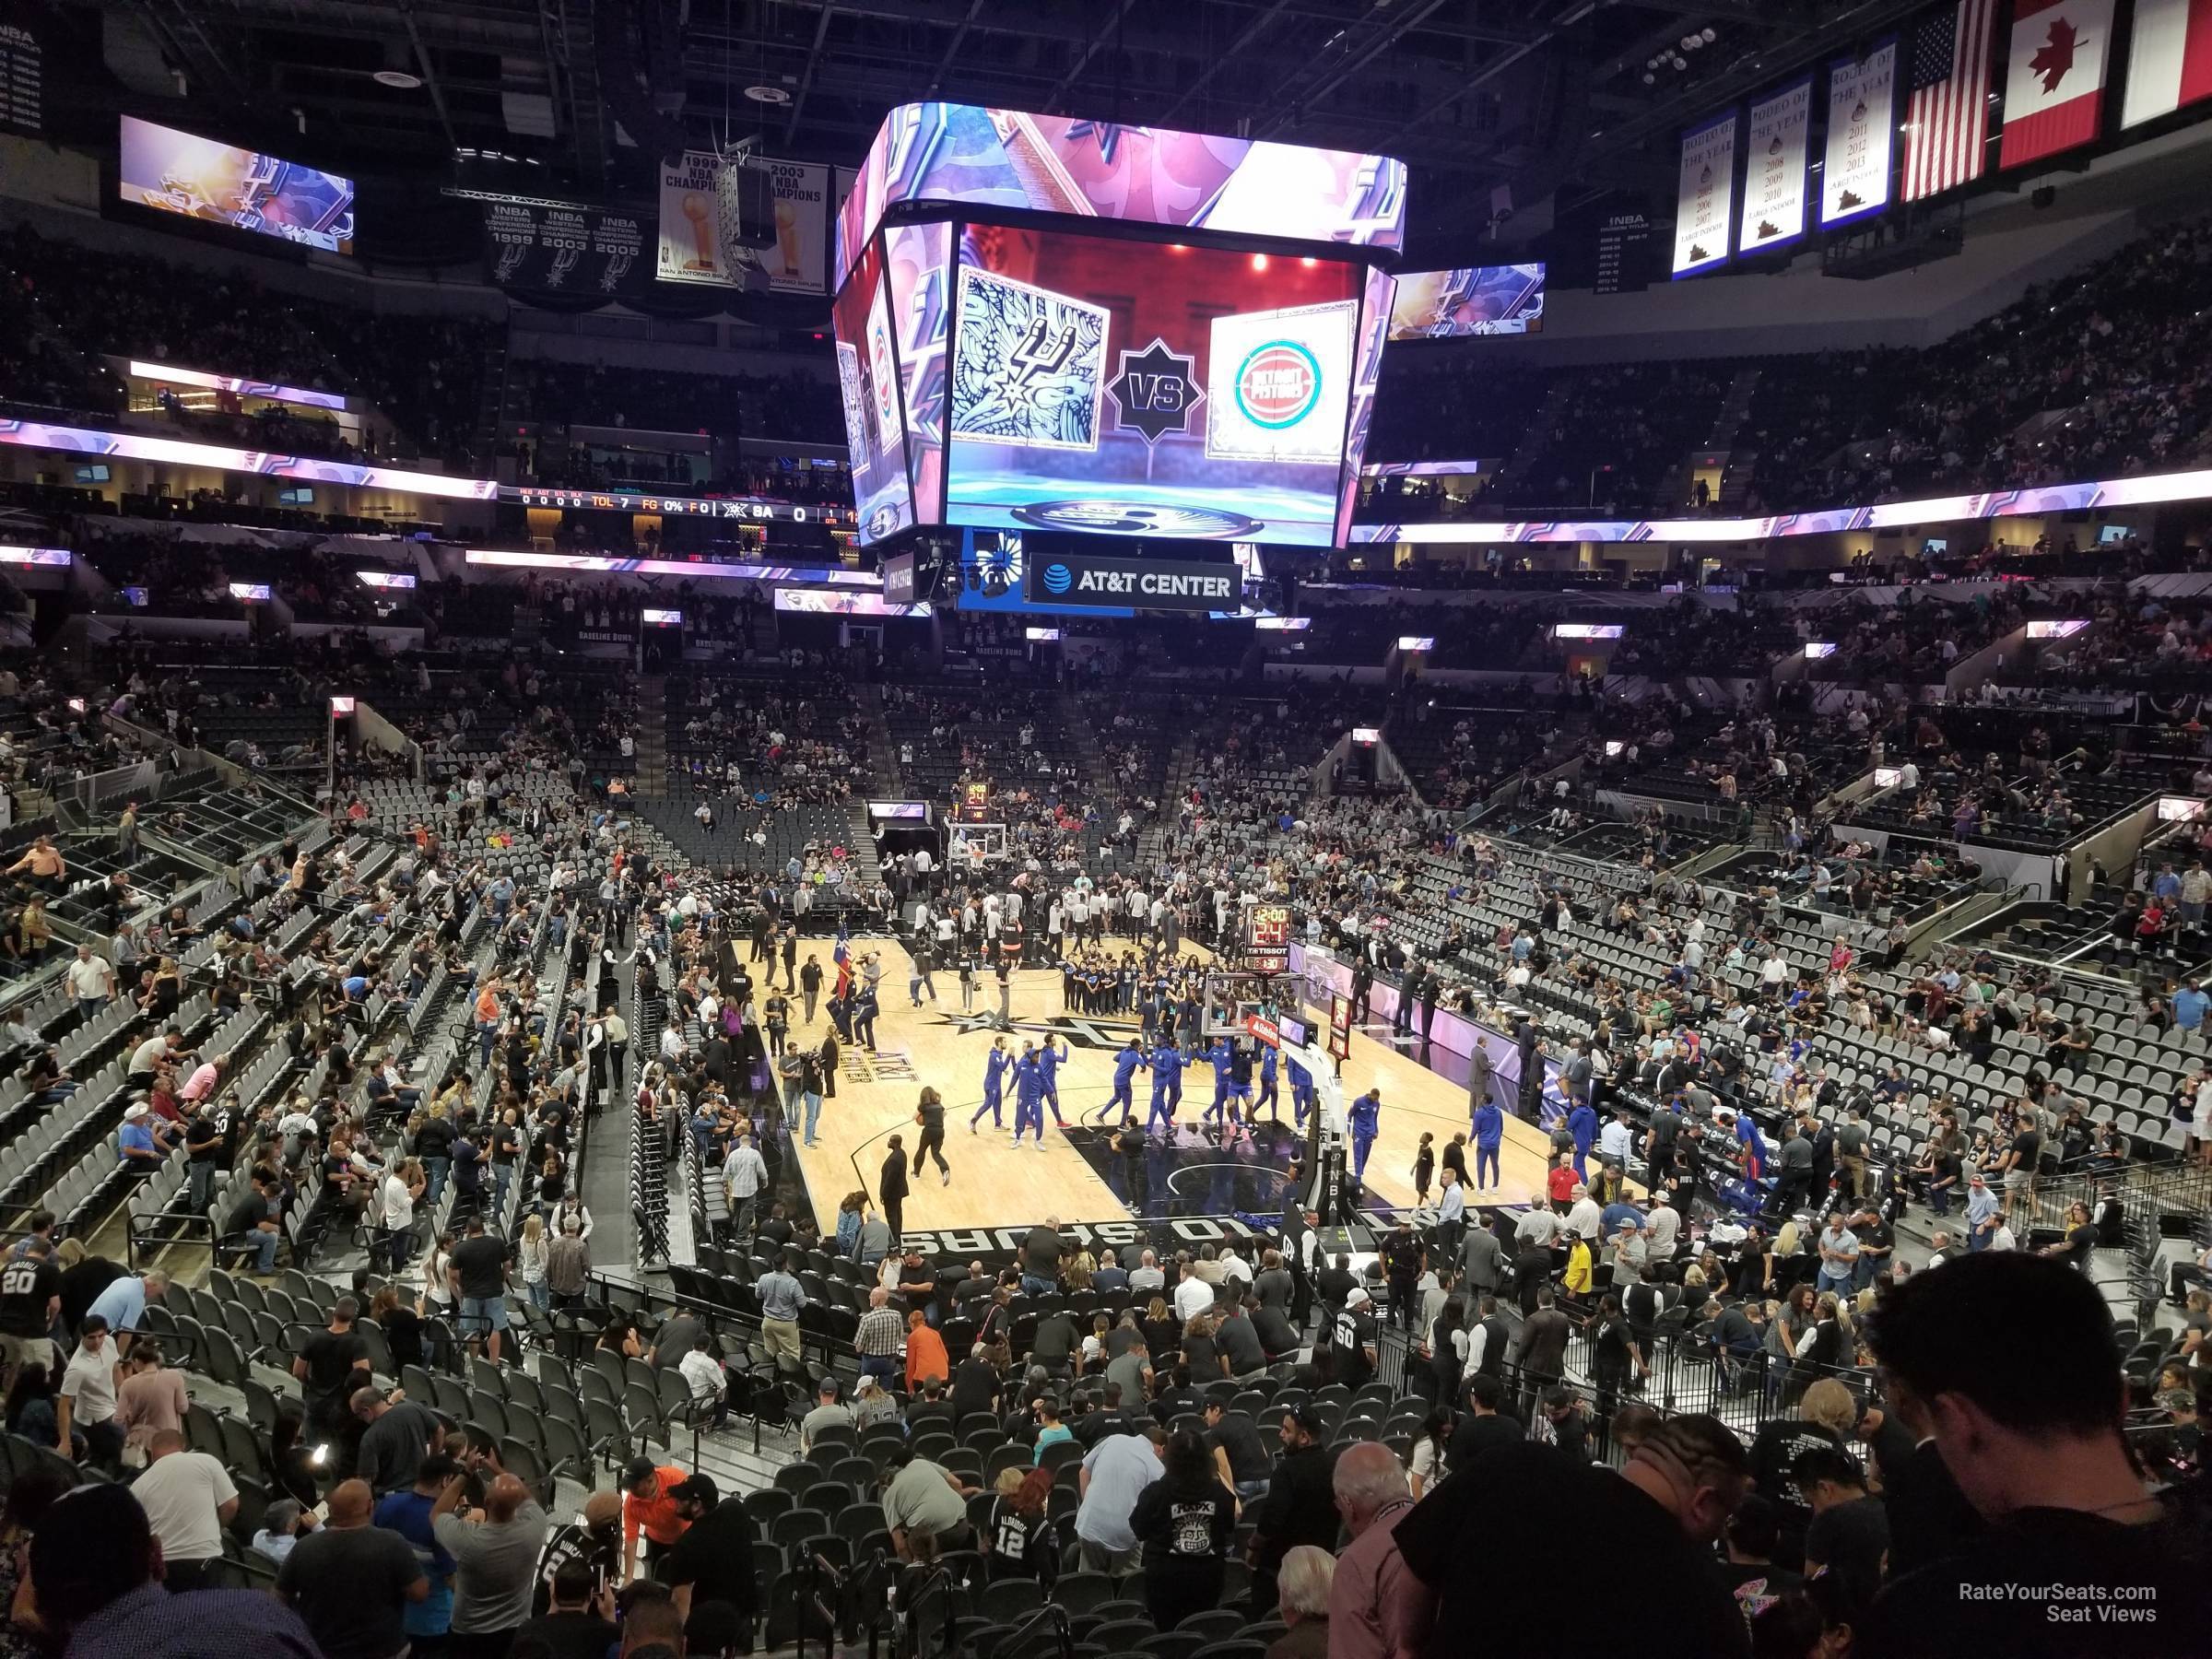 section 116, row 27 seat view  for basketball - at&t center